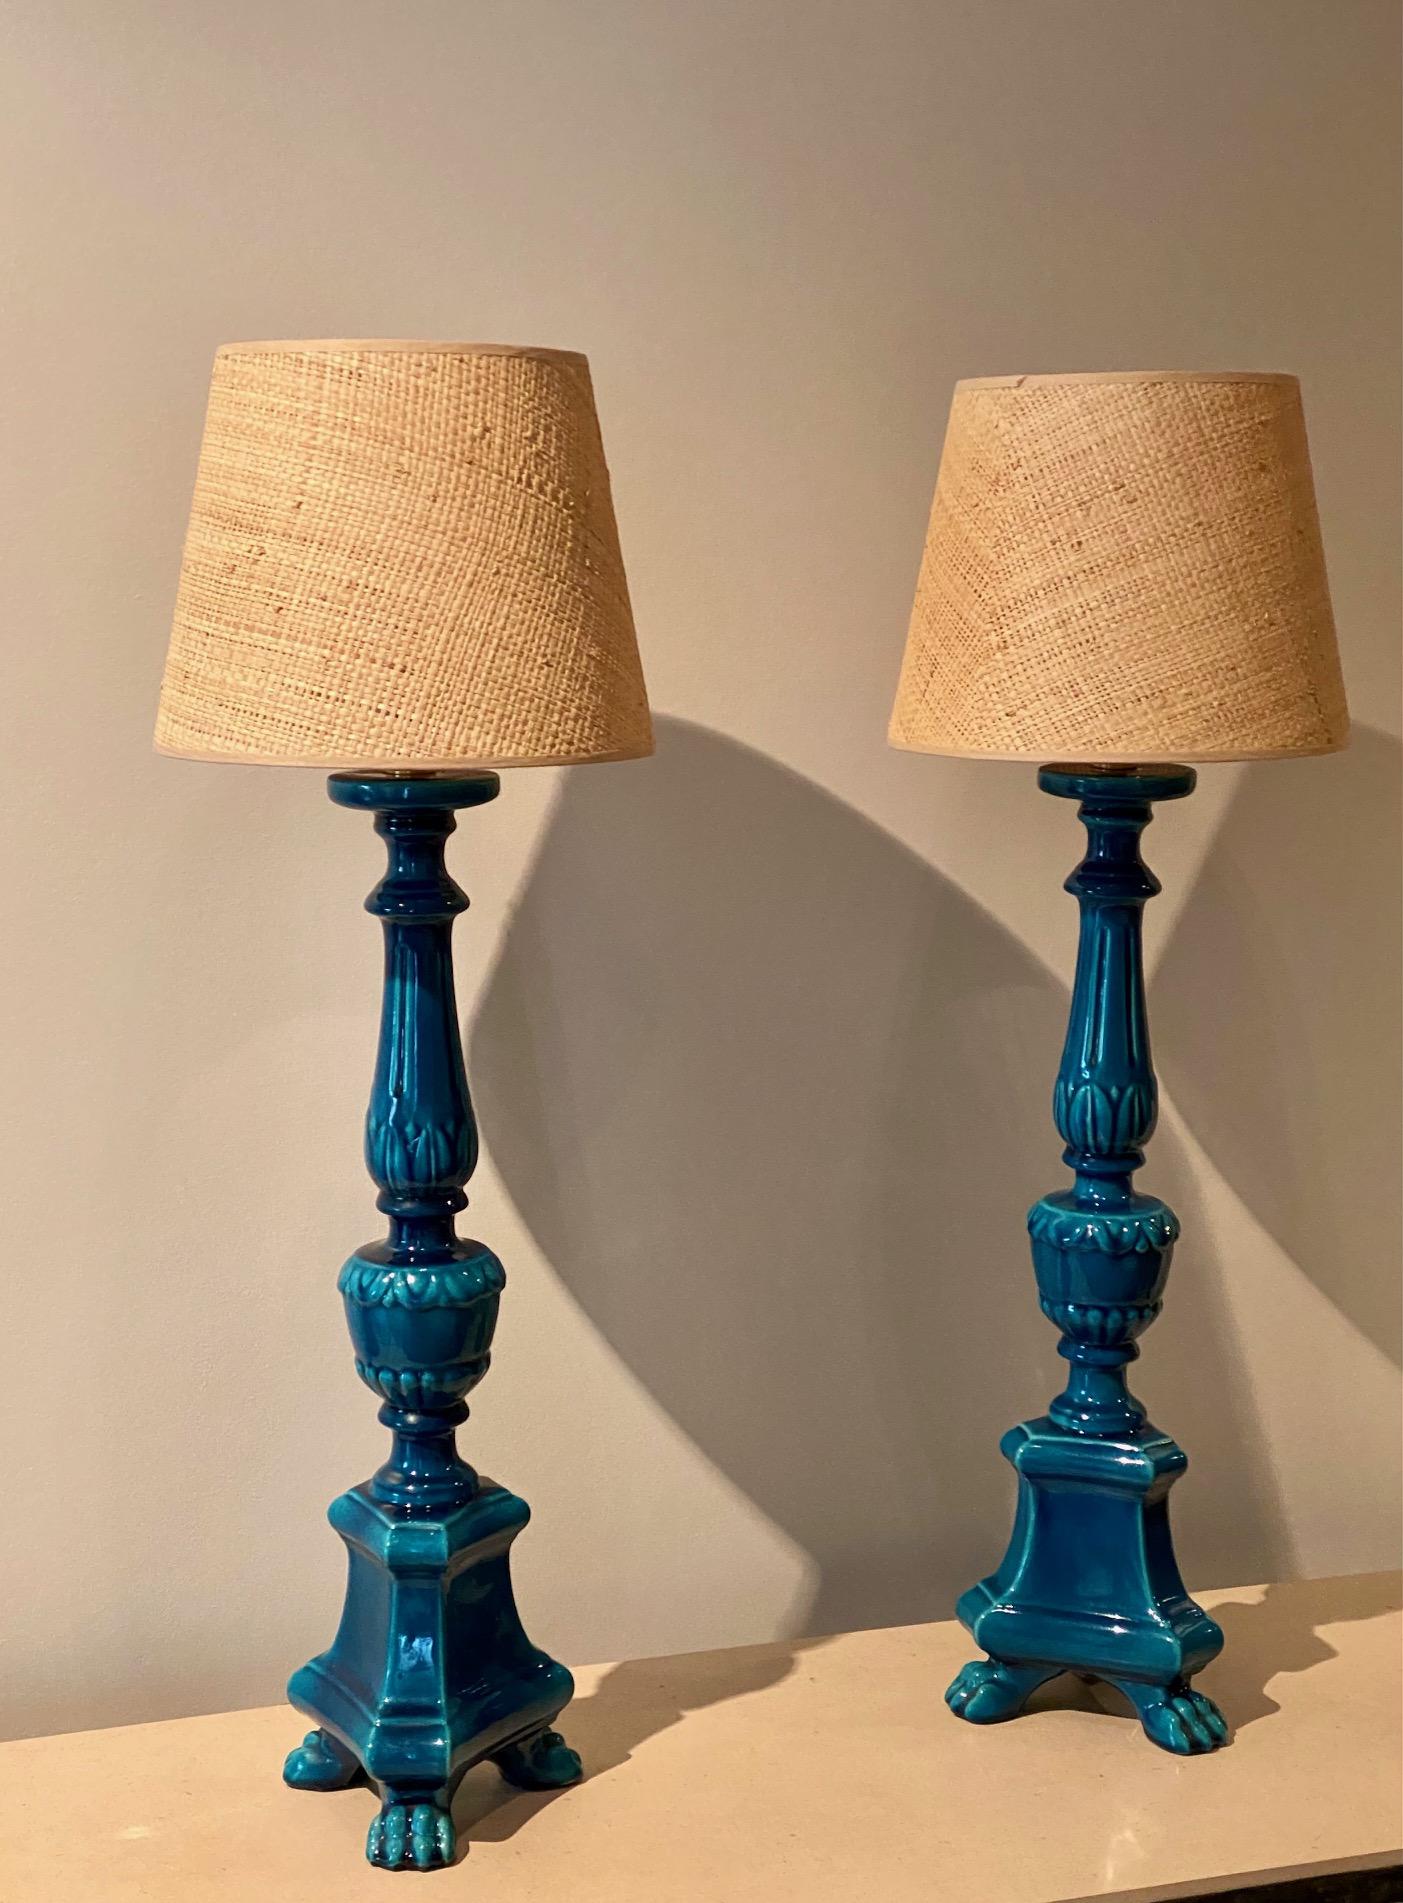 1970's Ceramic lamp bases, blue enamel stoneware with rattan shades (new)
The pair is signed by the French ceramicist Pol Chambost (1906-1983)
The height dimension for the ceramic solely is H 55 cm (and H 75 cm with shades)

Note to international